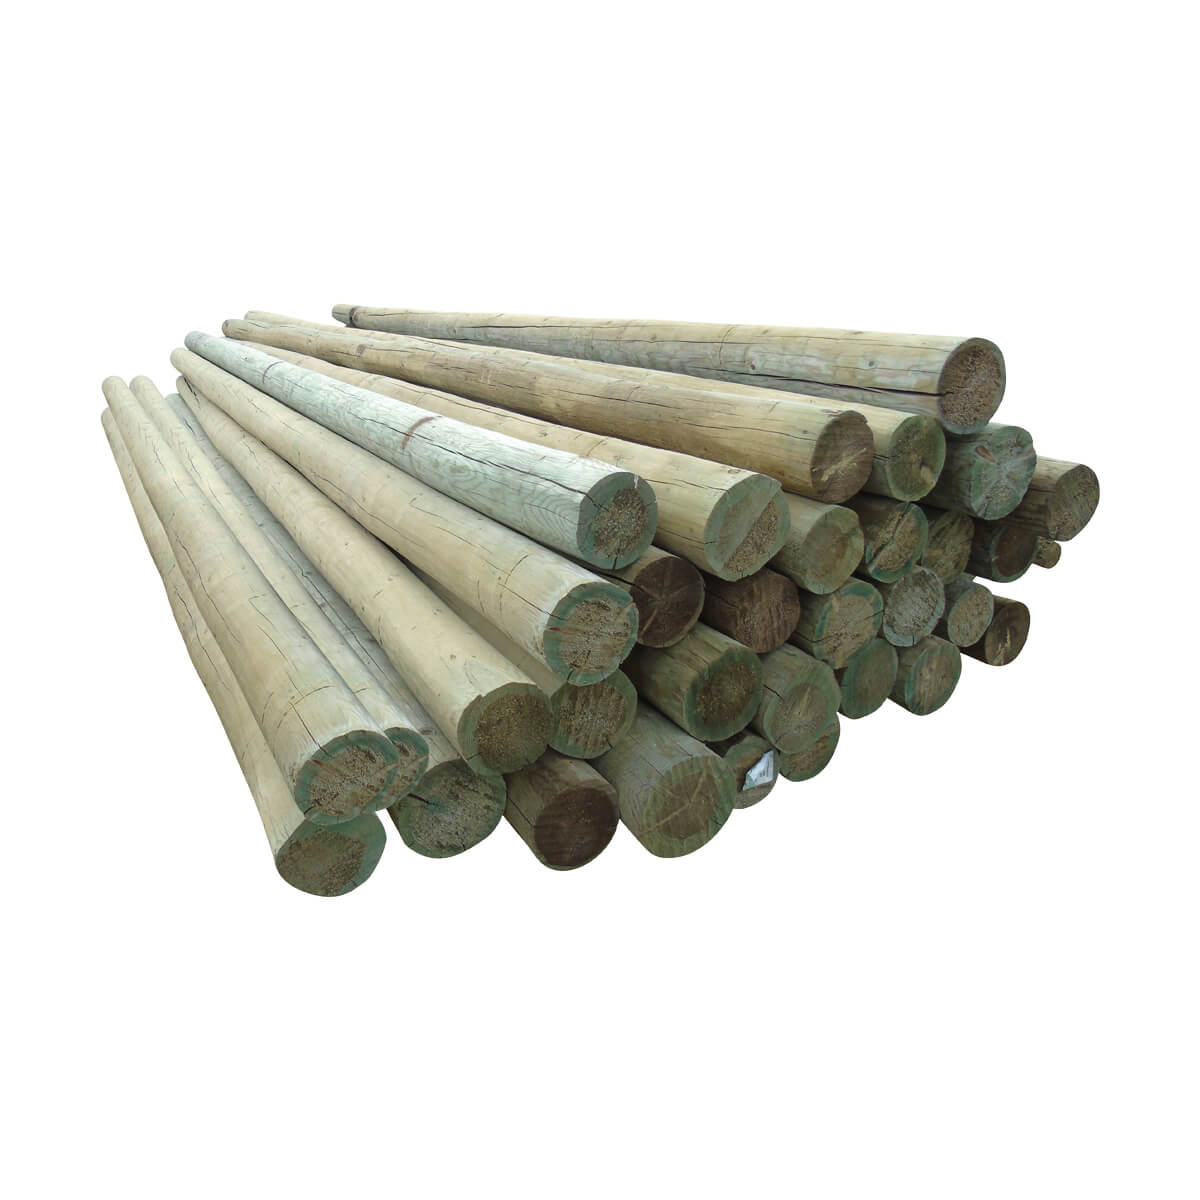 Peeled Fence Poles - Blunt - 7-in x 8-ft